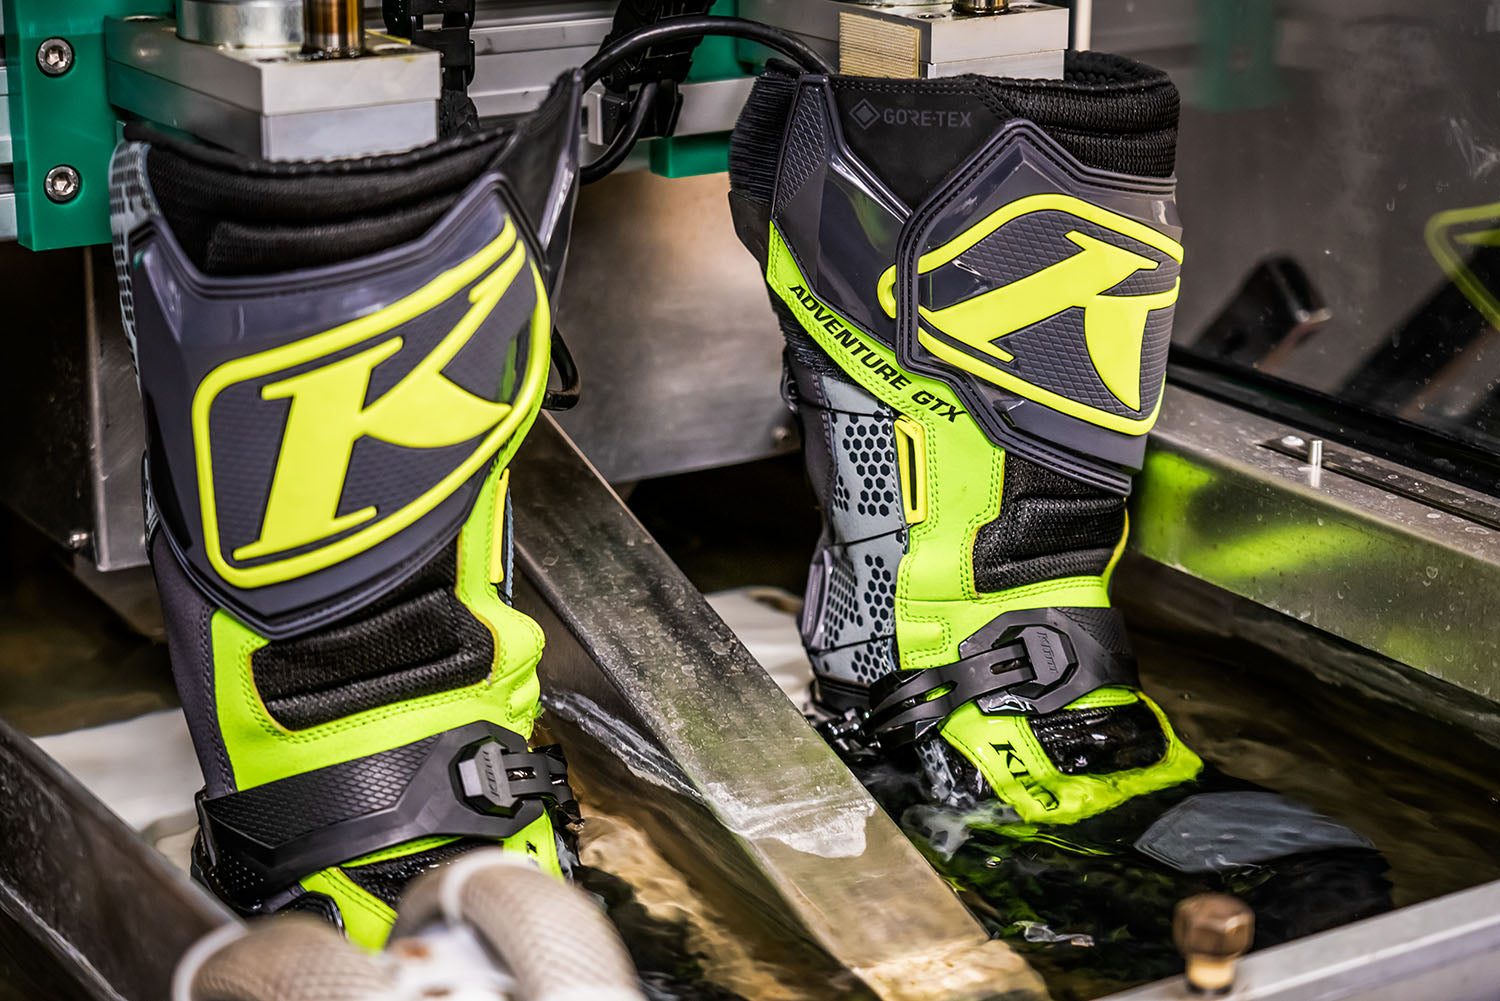 KLIM GORE-TEX BOOTS BEING TESTED